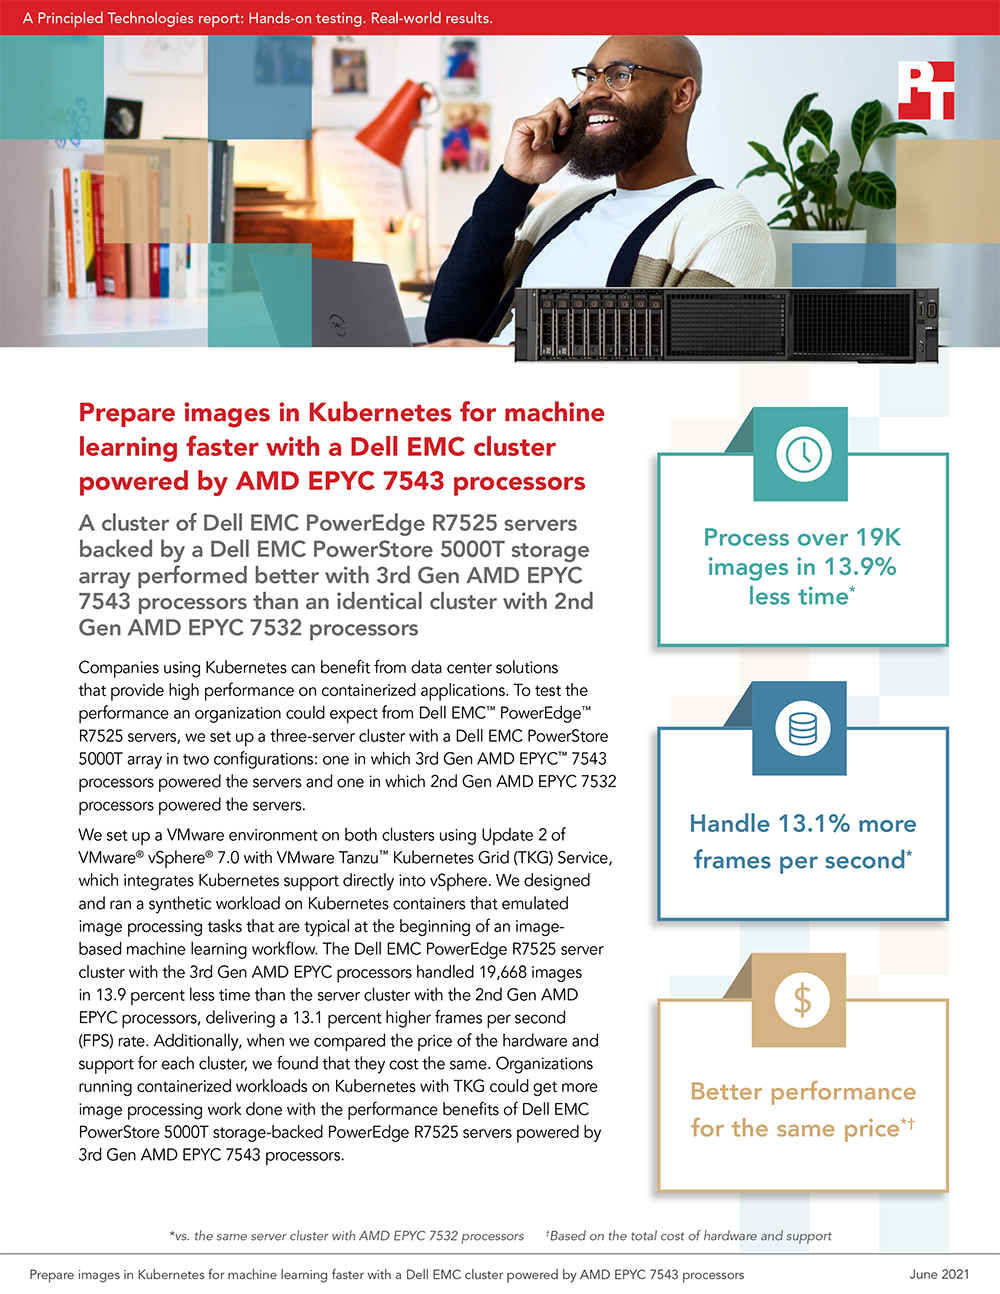 Principled Technologies Publishes Kubernetes Image Processing Performance Study on Two Different Configurations of Dell EMC PowerEdge R7525 Server Clusters